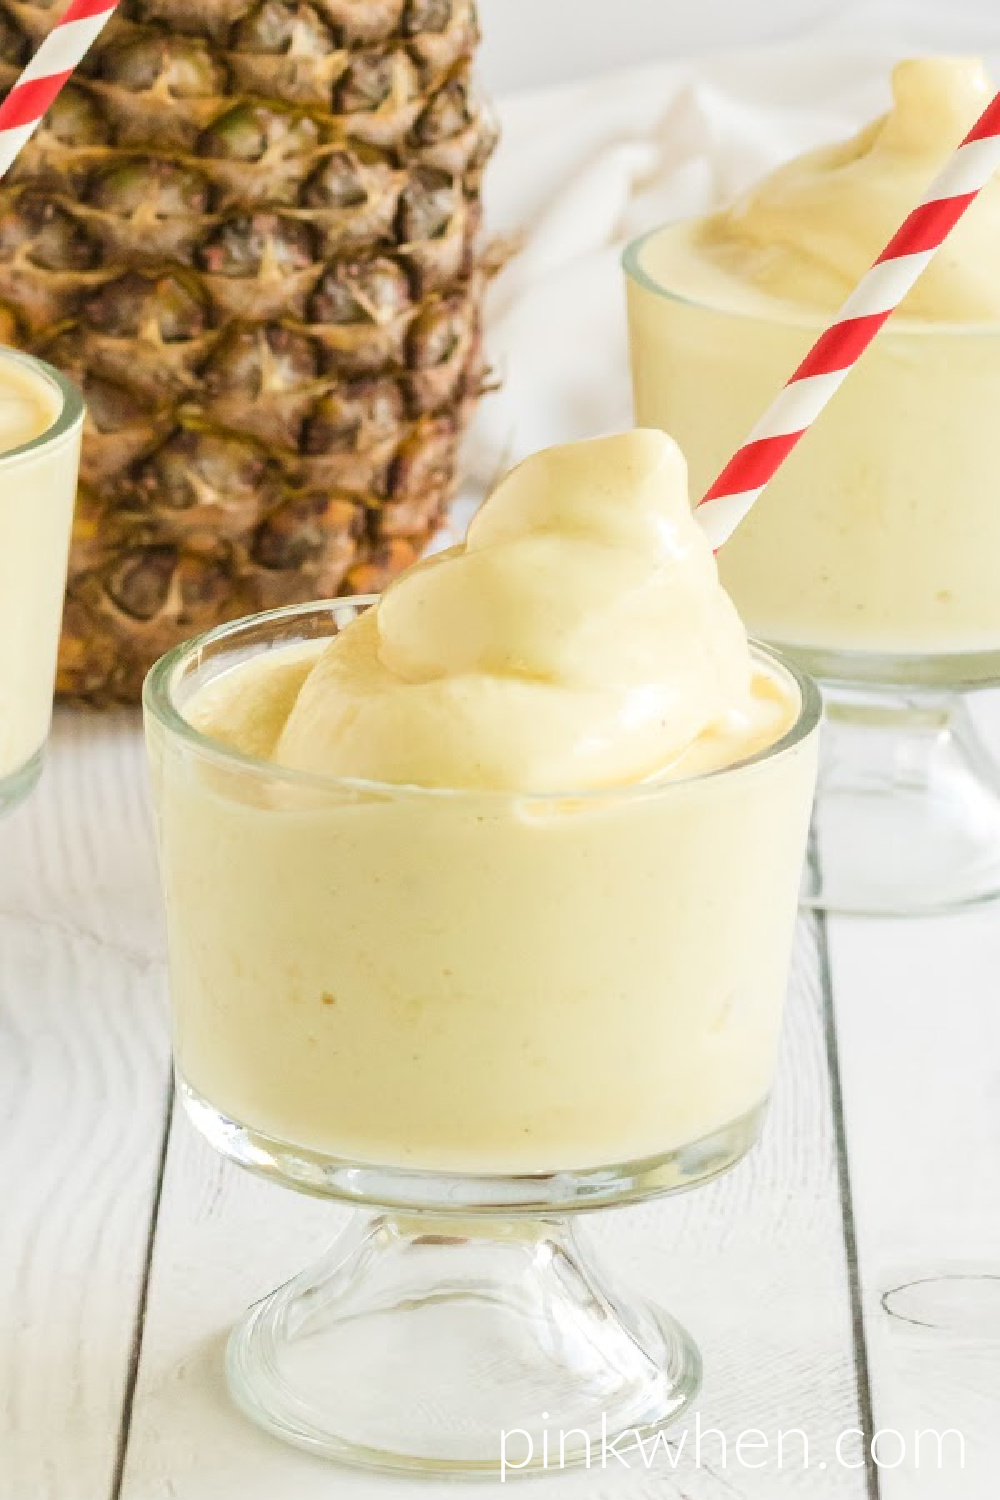 This Dole Whip Recipe is a delicious and easy treat you can make at home when you're craving a little Hawaiian adventure or can't make it to the theme parks! Made with frozen pineapple, pineapple juice, and vanilla ice cream.